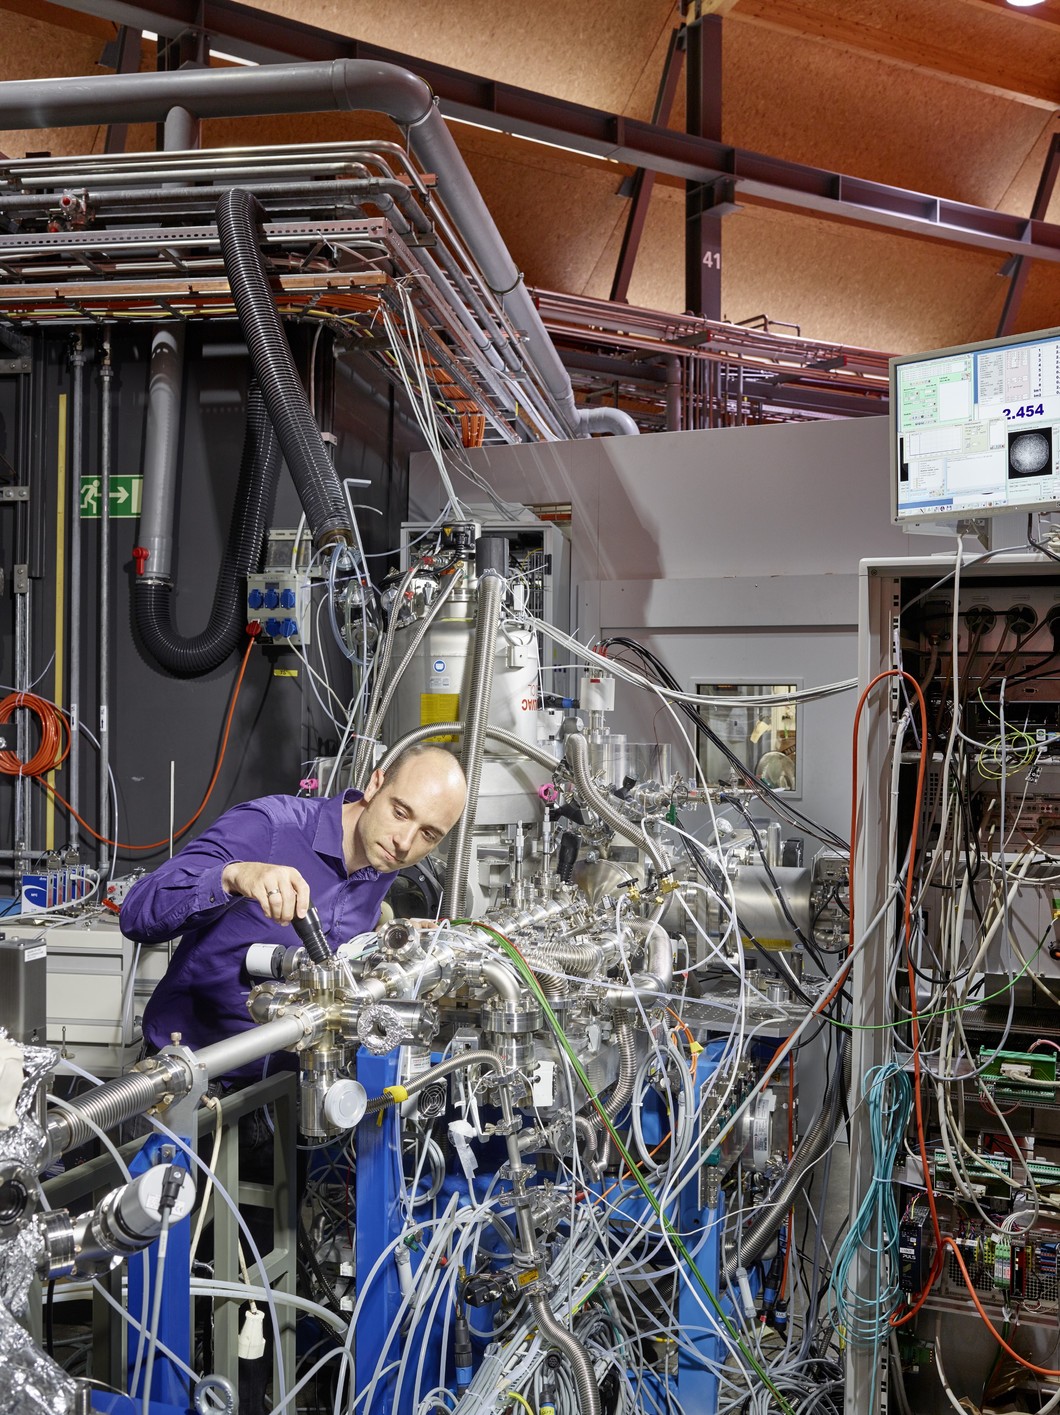 PSI researcher Patrick Hemberger at the VUV beamline of the Swiss Light Source SLS. Here he and colleagues investigated the details of the breakdown of lignin into other substances. The results could contribute to enabling the future use of lignin as a precursor for production of fuels and chemicals. (Photo: Scanderbeg Sauer Photography)